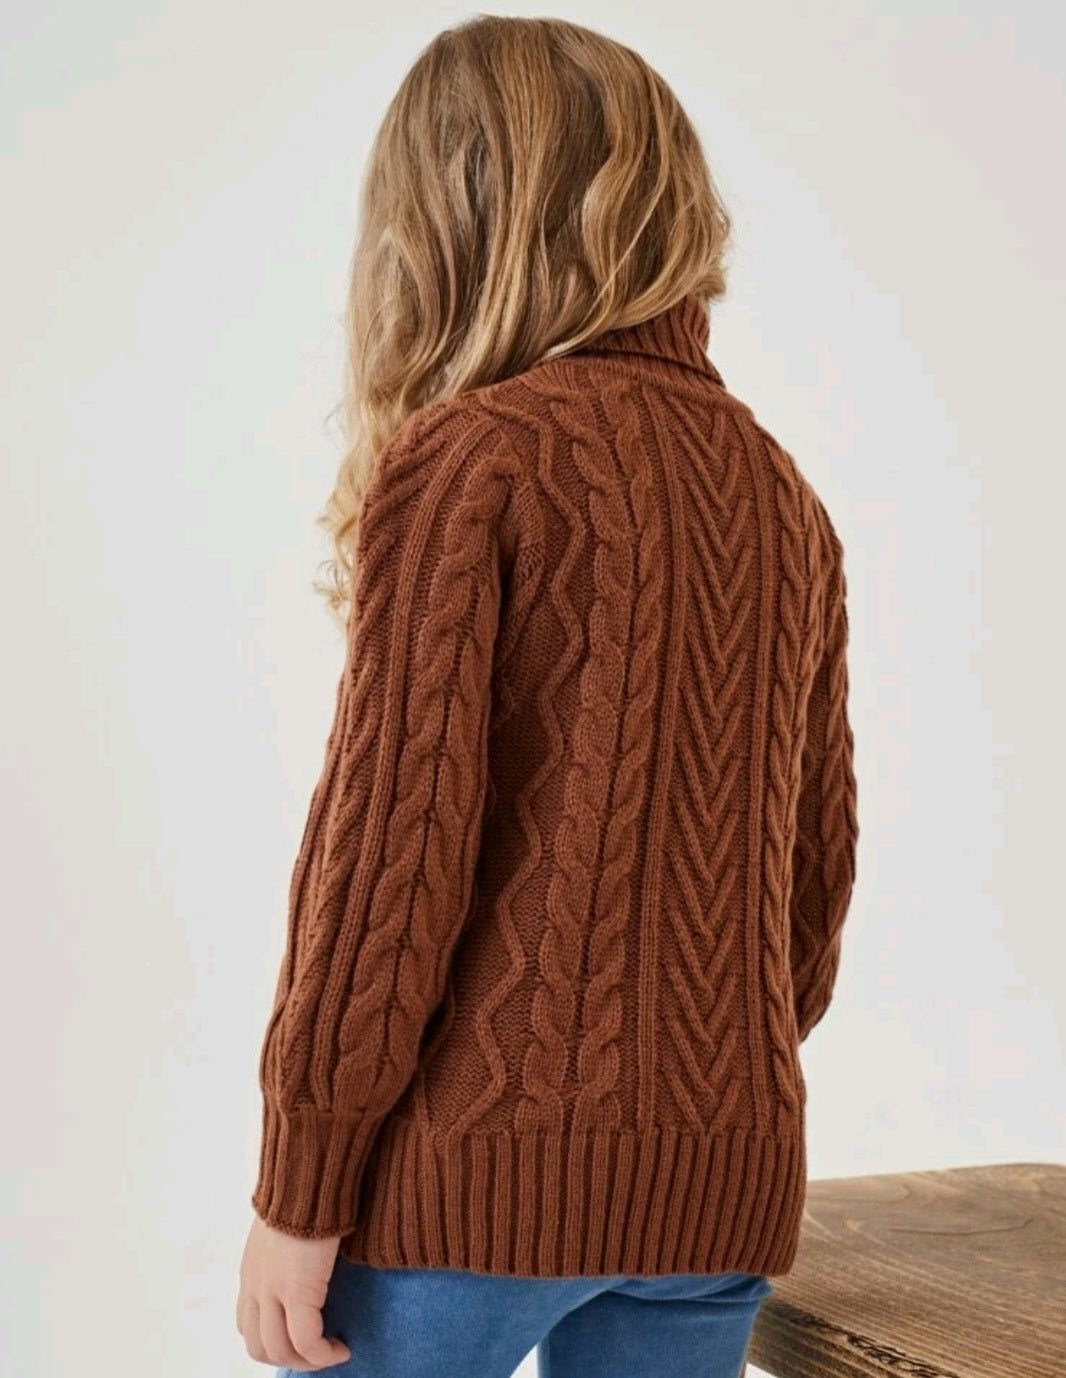 Chocolate Cable Knit Turtle Neck Sweater Gender Neutral